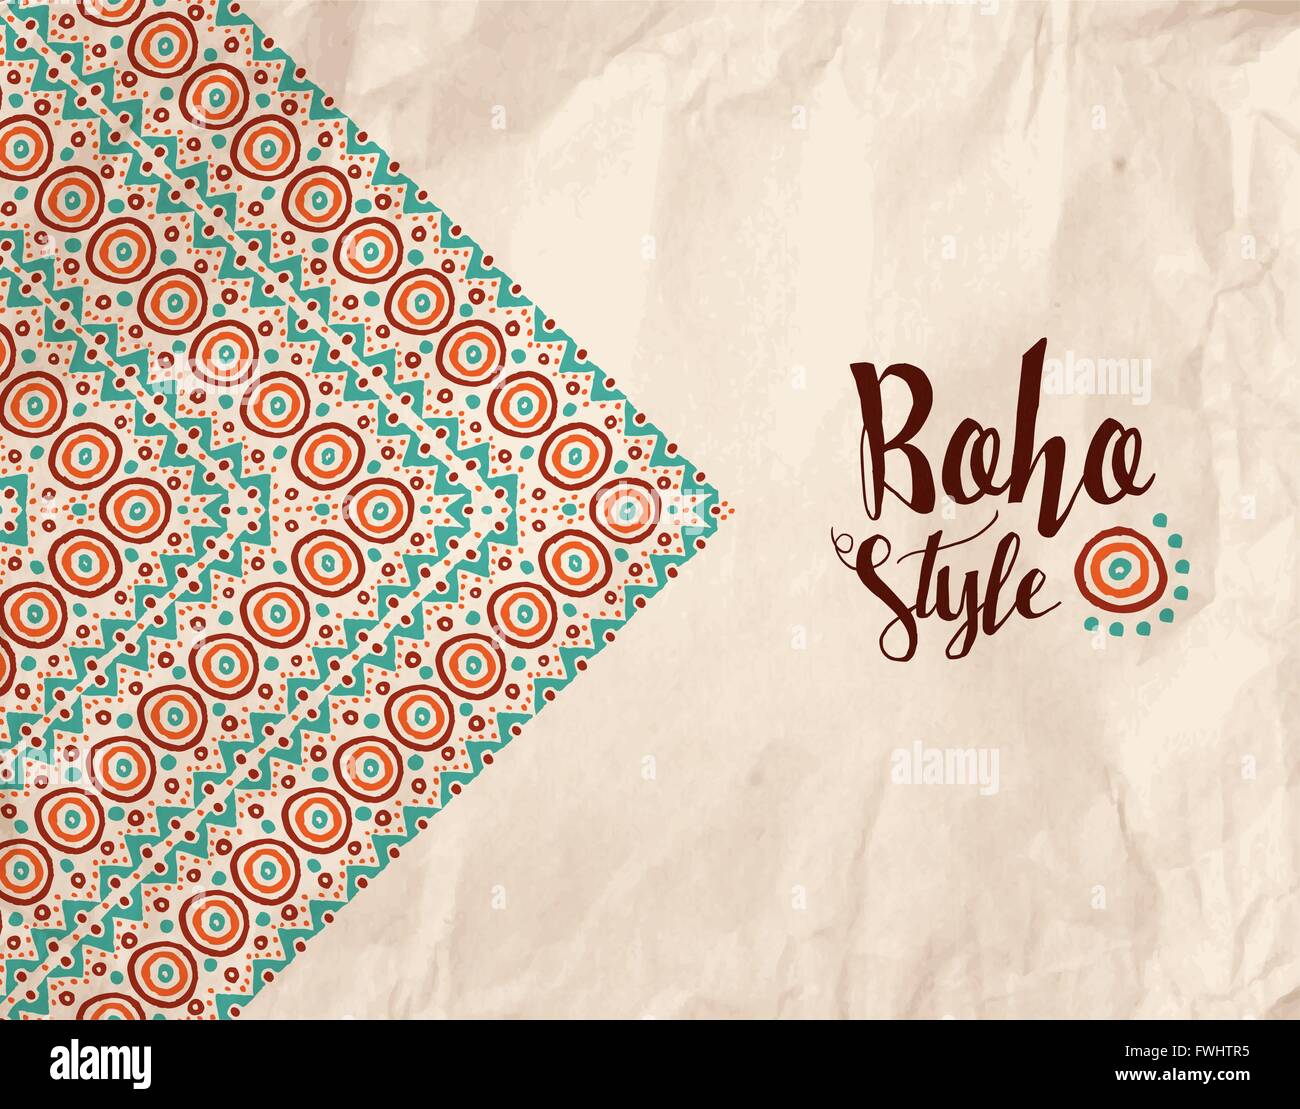 Boho style kraft paper texture design with colorful tribal handmade illustration of geometry shapes and stripes. EPS10 vector. Stock Vector